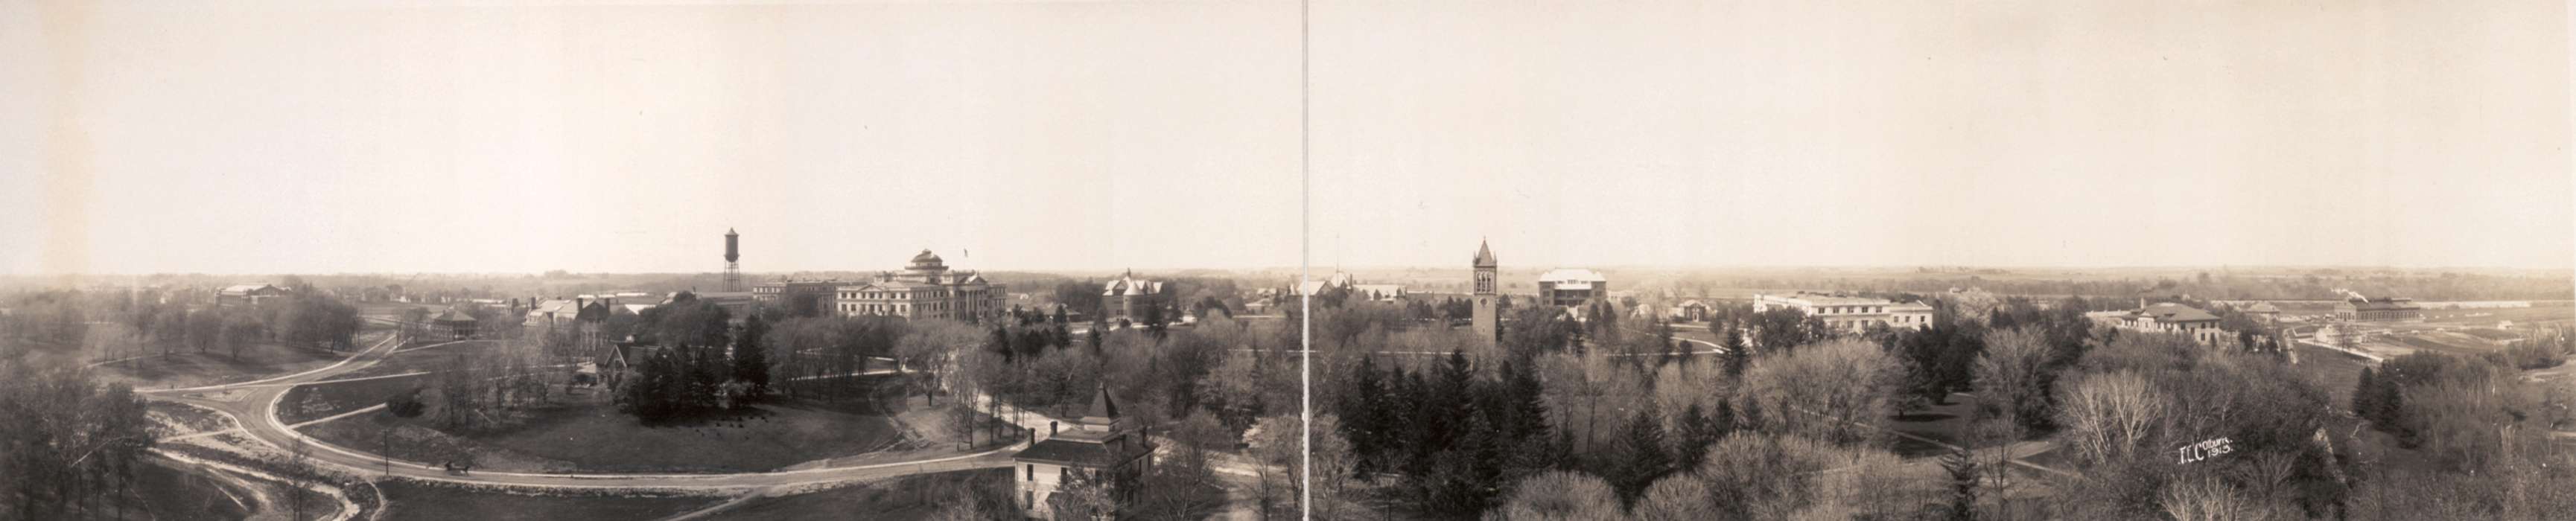 panorama, Library of Congress, Aerial Shots, Iowa History, history of Iowa, Main Streets & Town Squares, iowa state university, Schools and Education, Cities and Towns, Iowa